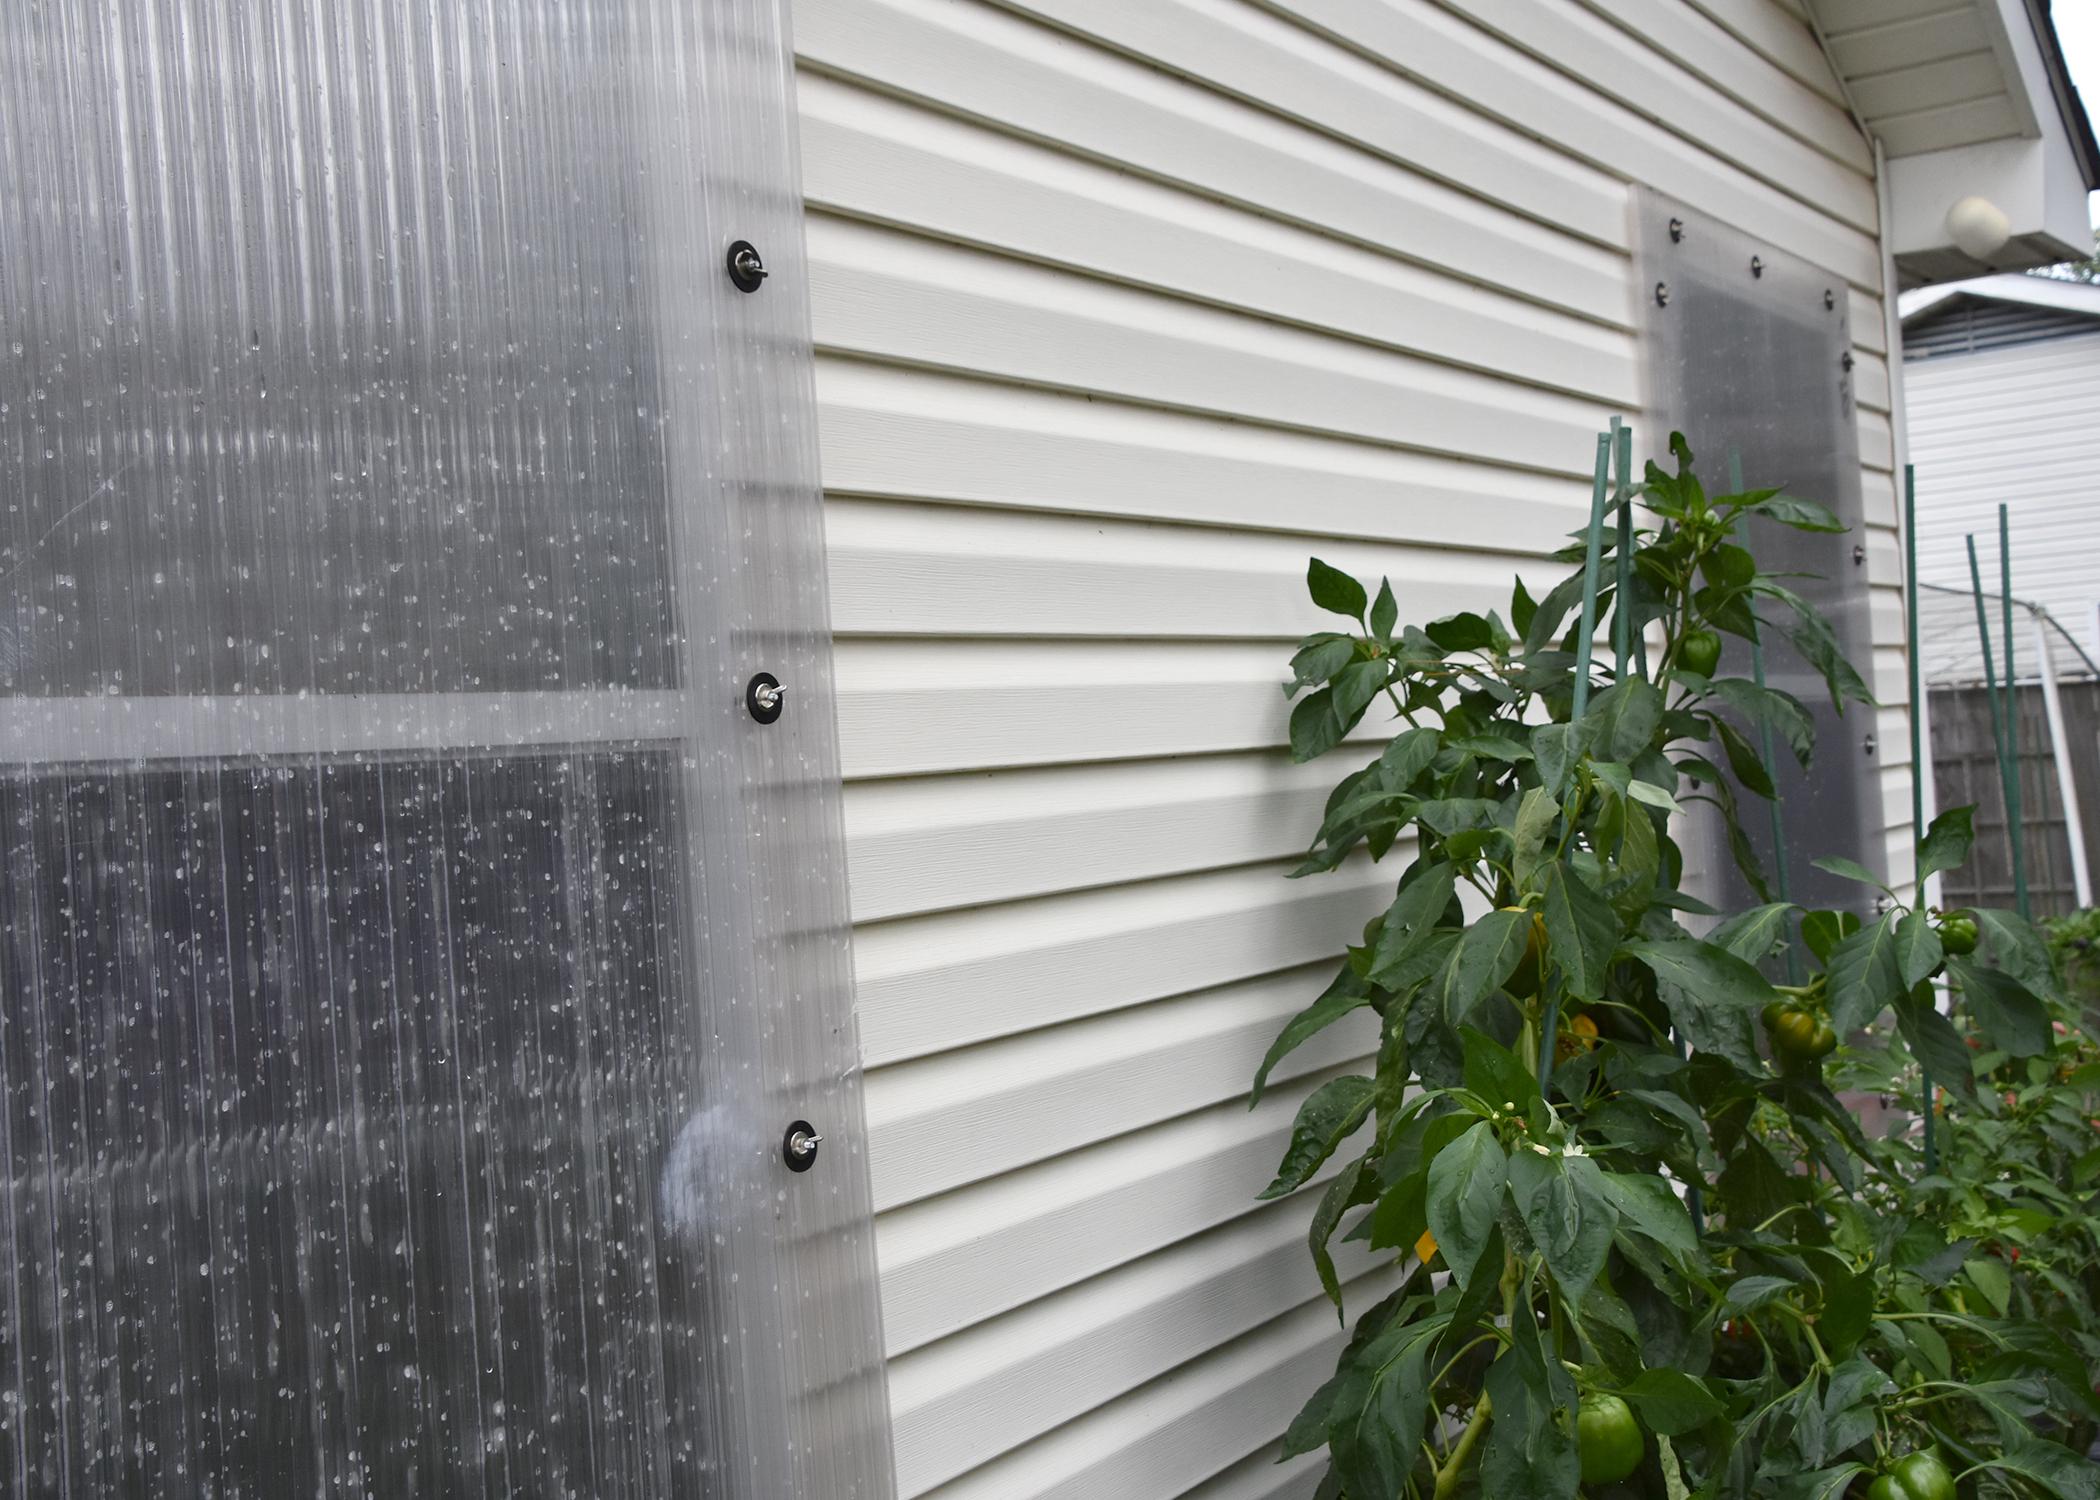 A clear panel covers a window on the exterior of a house.